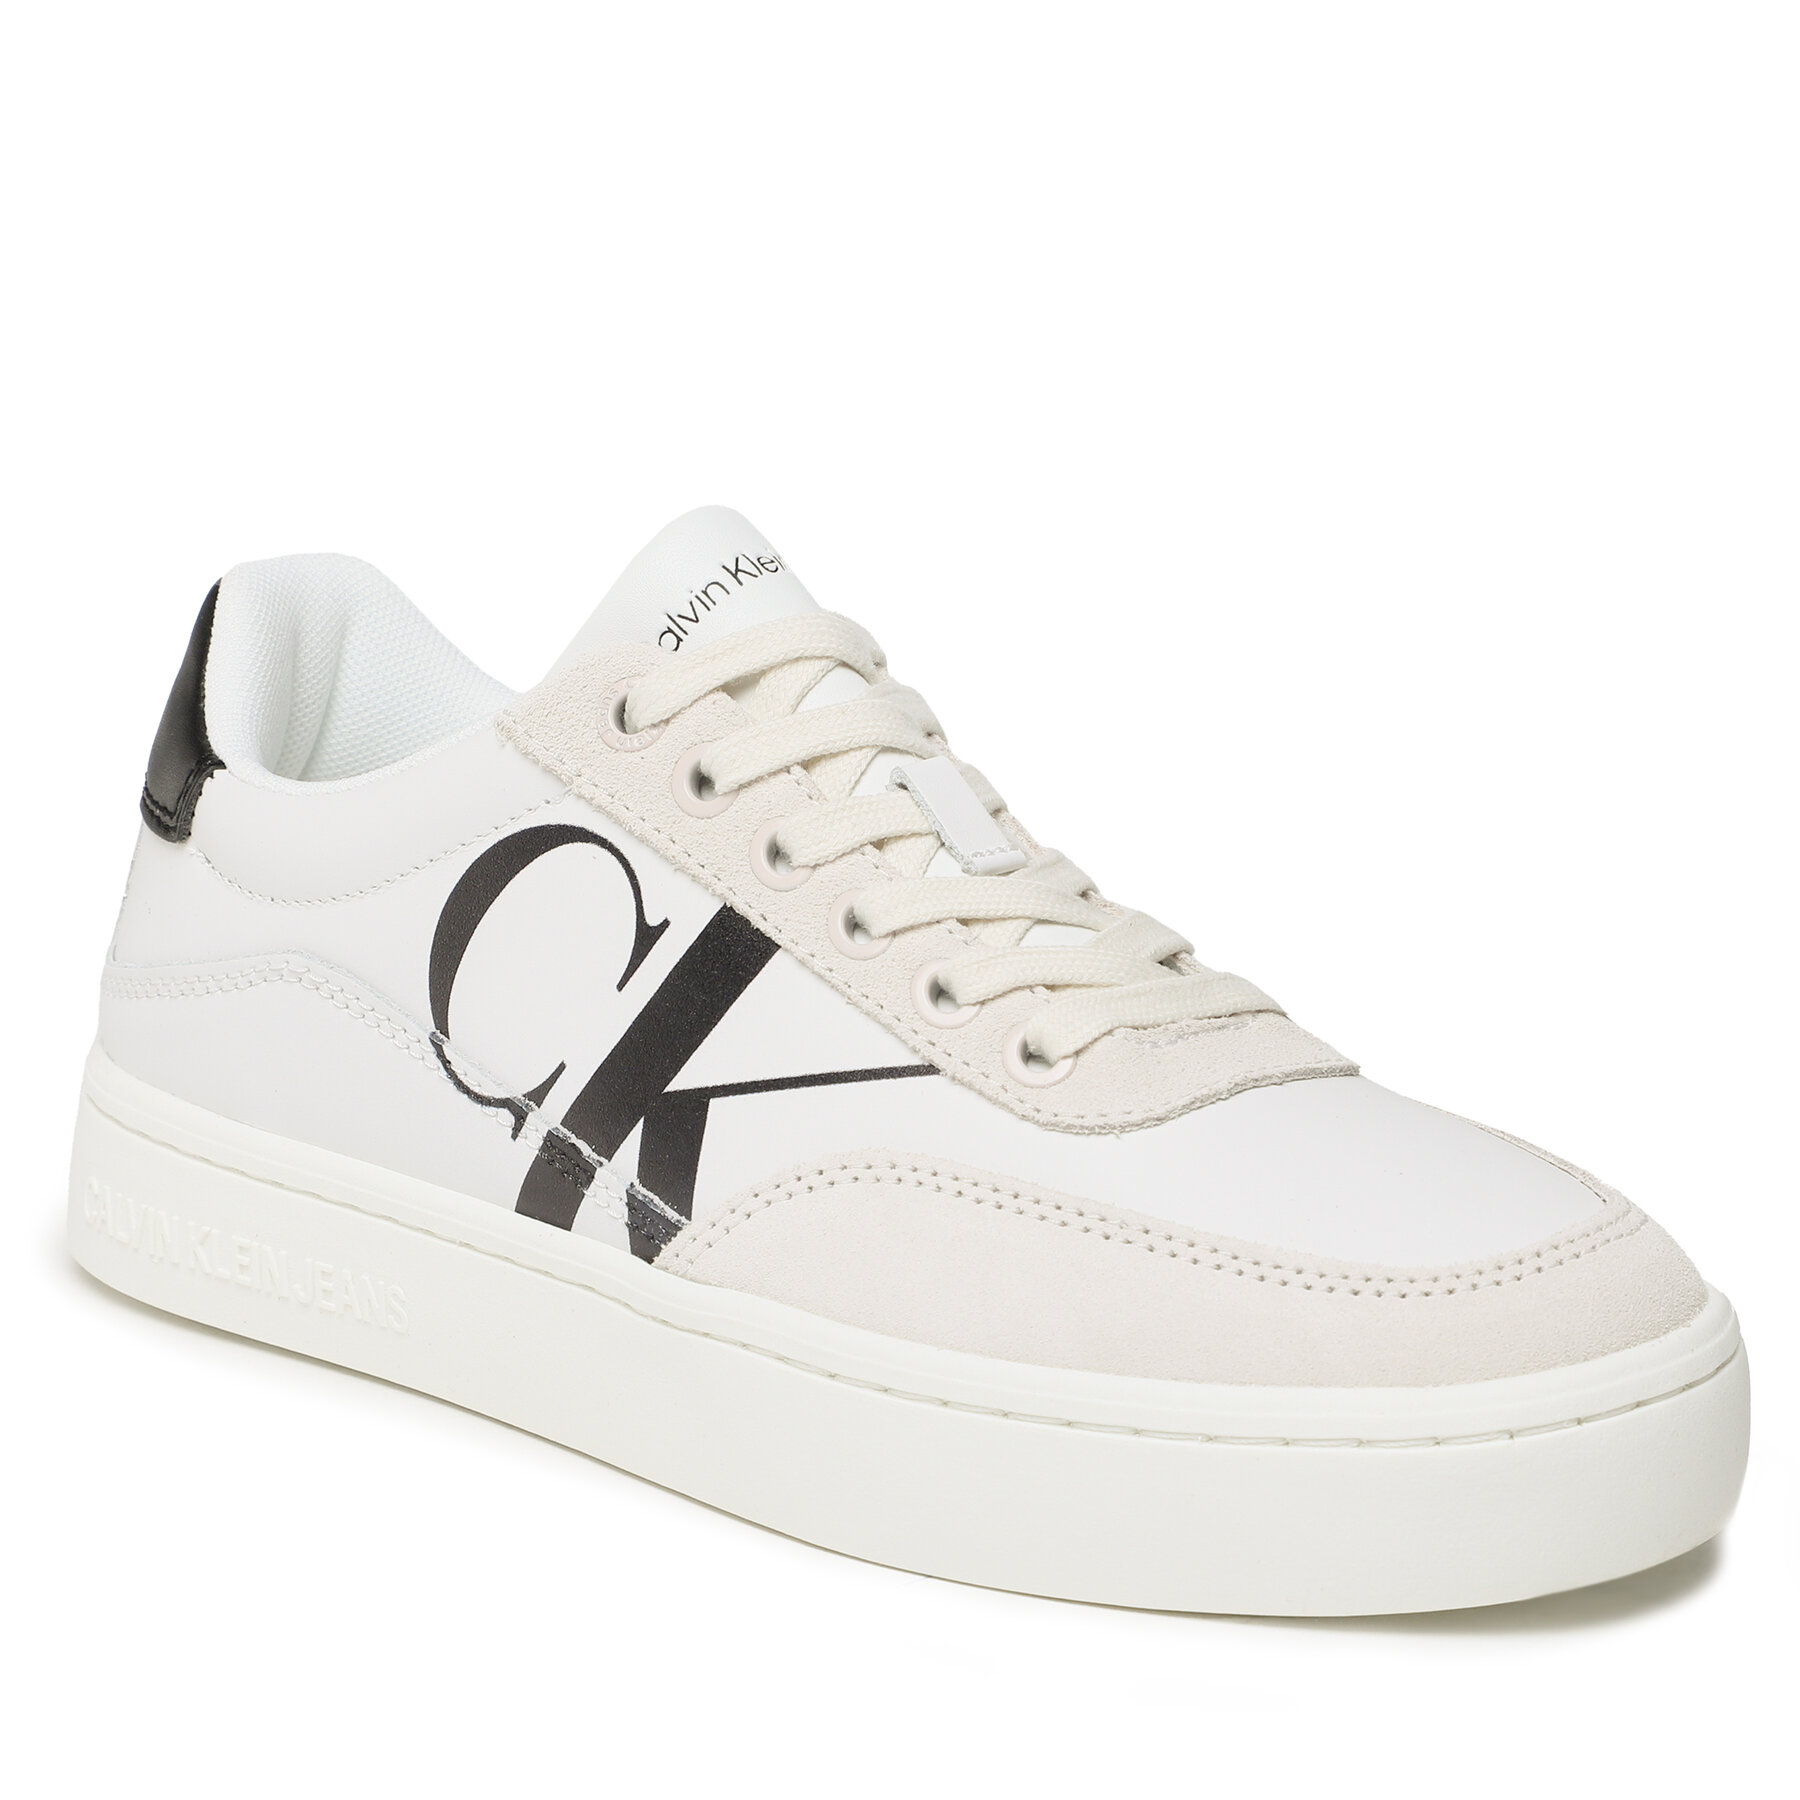 Sneakers Calvin Klein Jeans Classic Cupsole Laceup Mix Lth YW0YW01057 Bright White/Creamy White/Black YBR